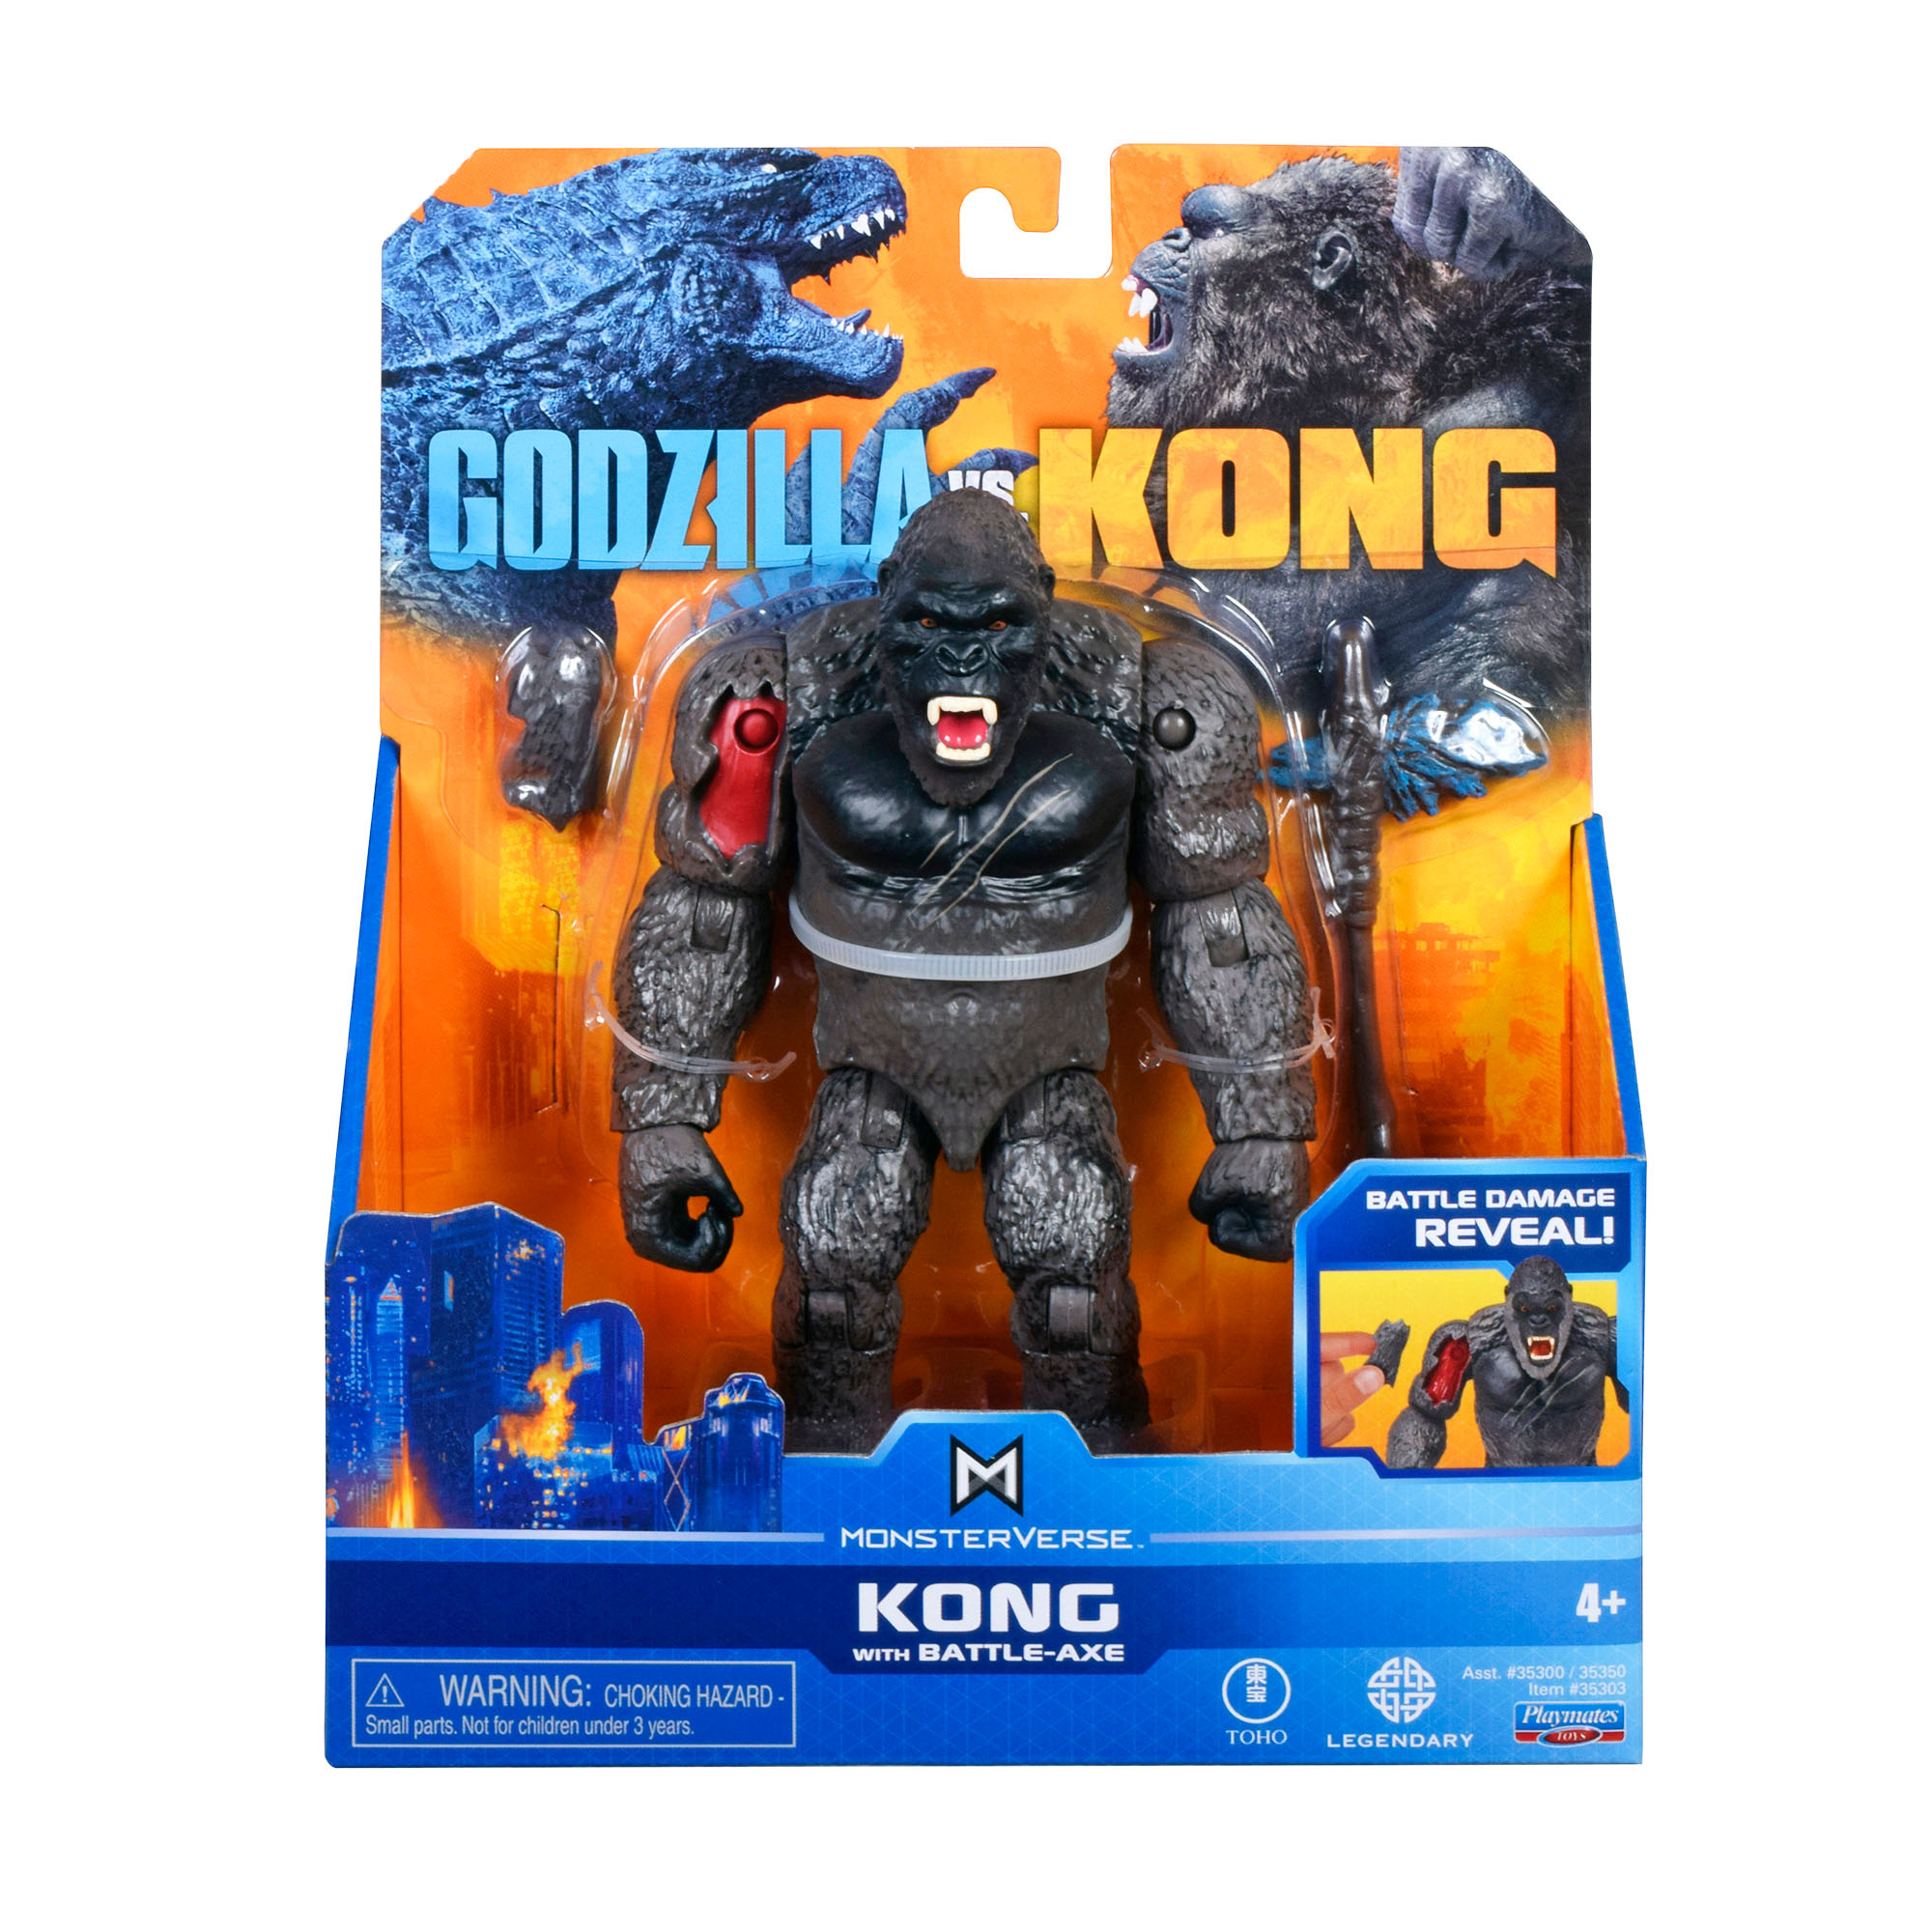 Godzilla vs Kong toys give us our first look at the epic ...